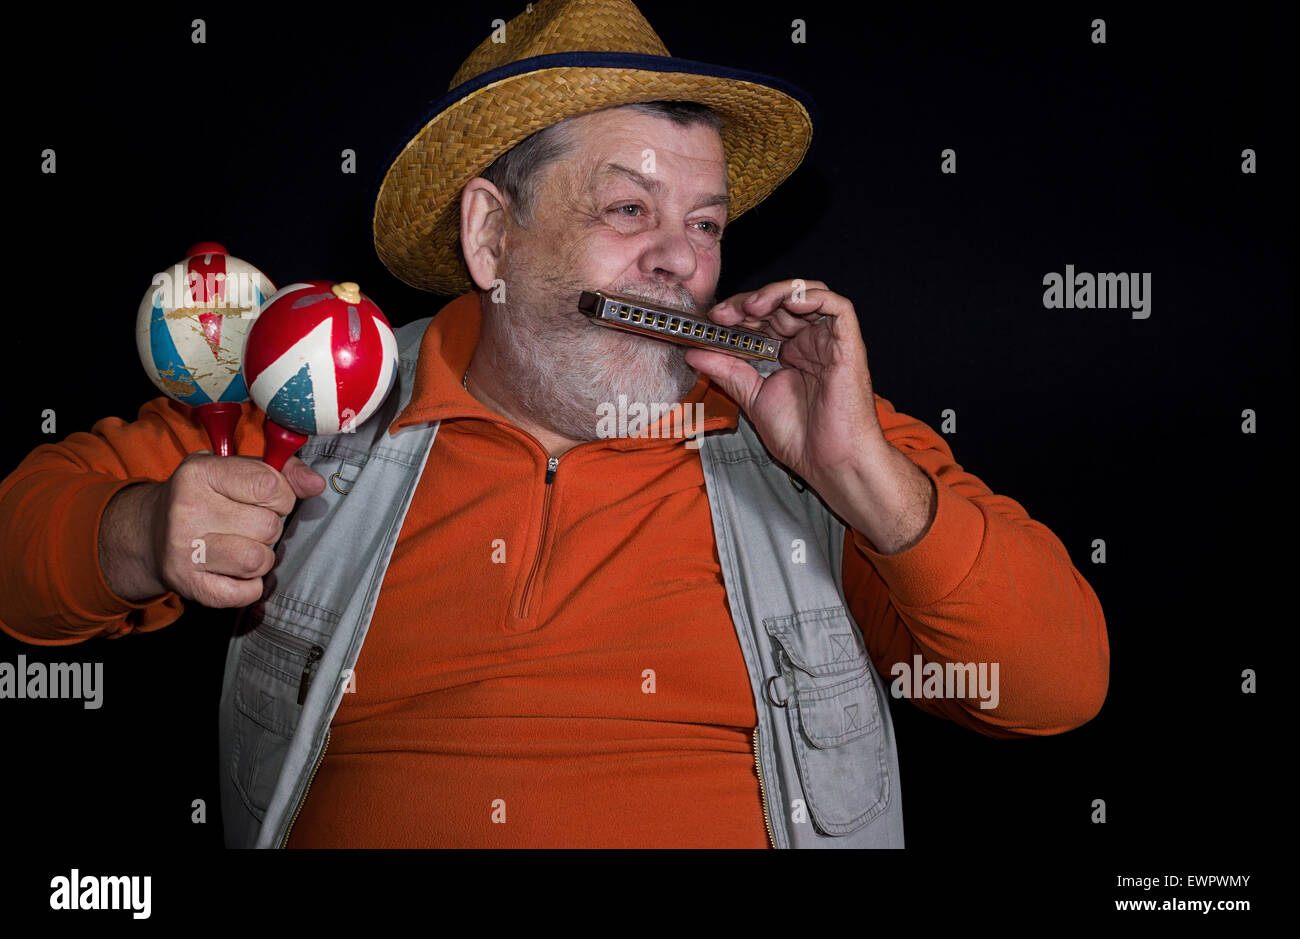 Senior musician with mouth-organ and maraca playing on a stage Stock Photo